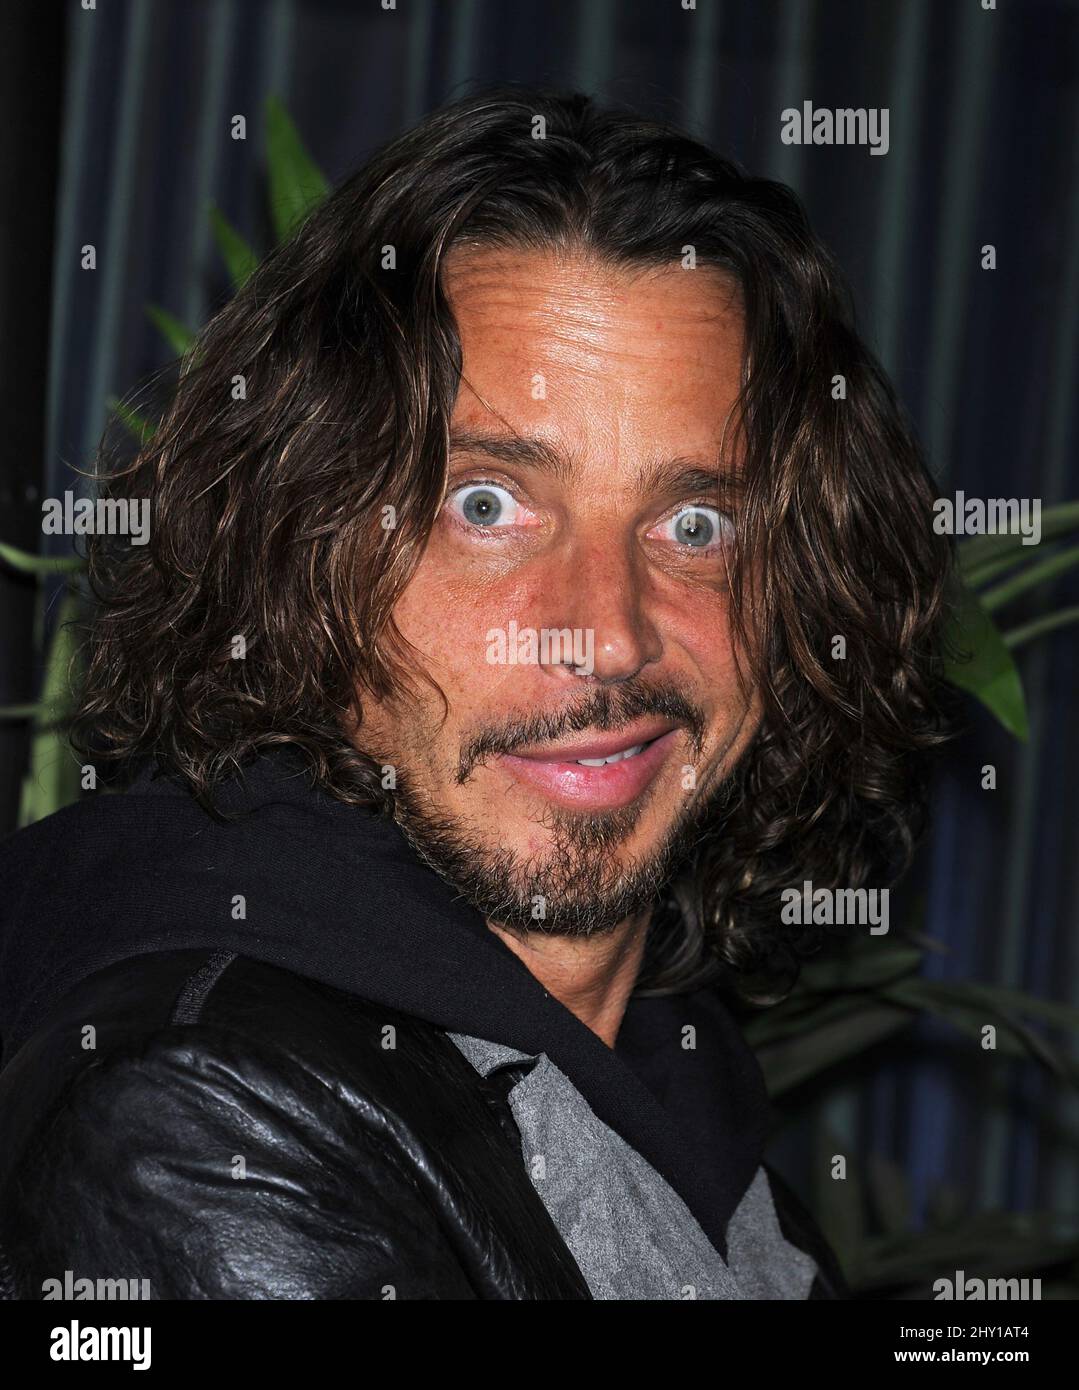 Chris Cornell attending the 28th Annual Rock and Roll Hall of Fame Induction Ceremony at Nokia Theatre in Los Angeles, California. Stock Photo